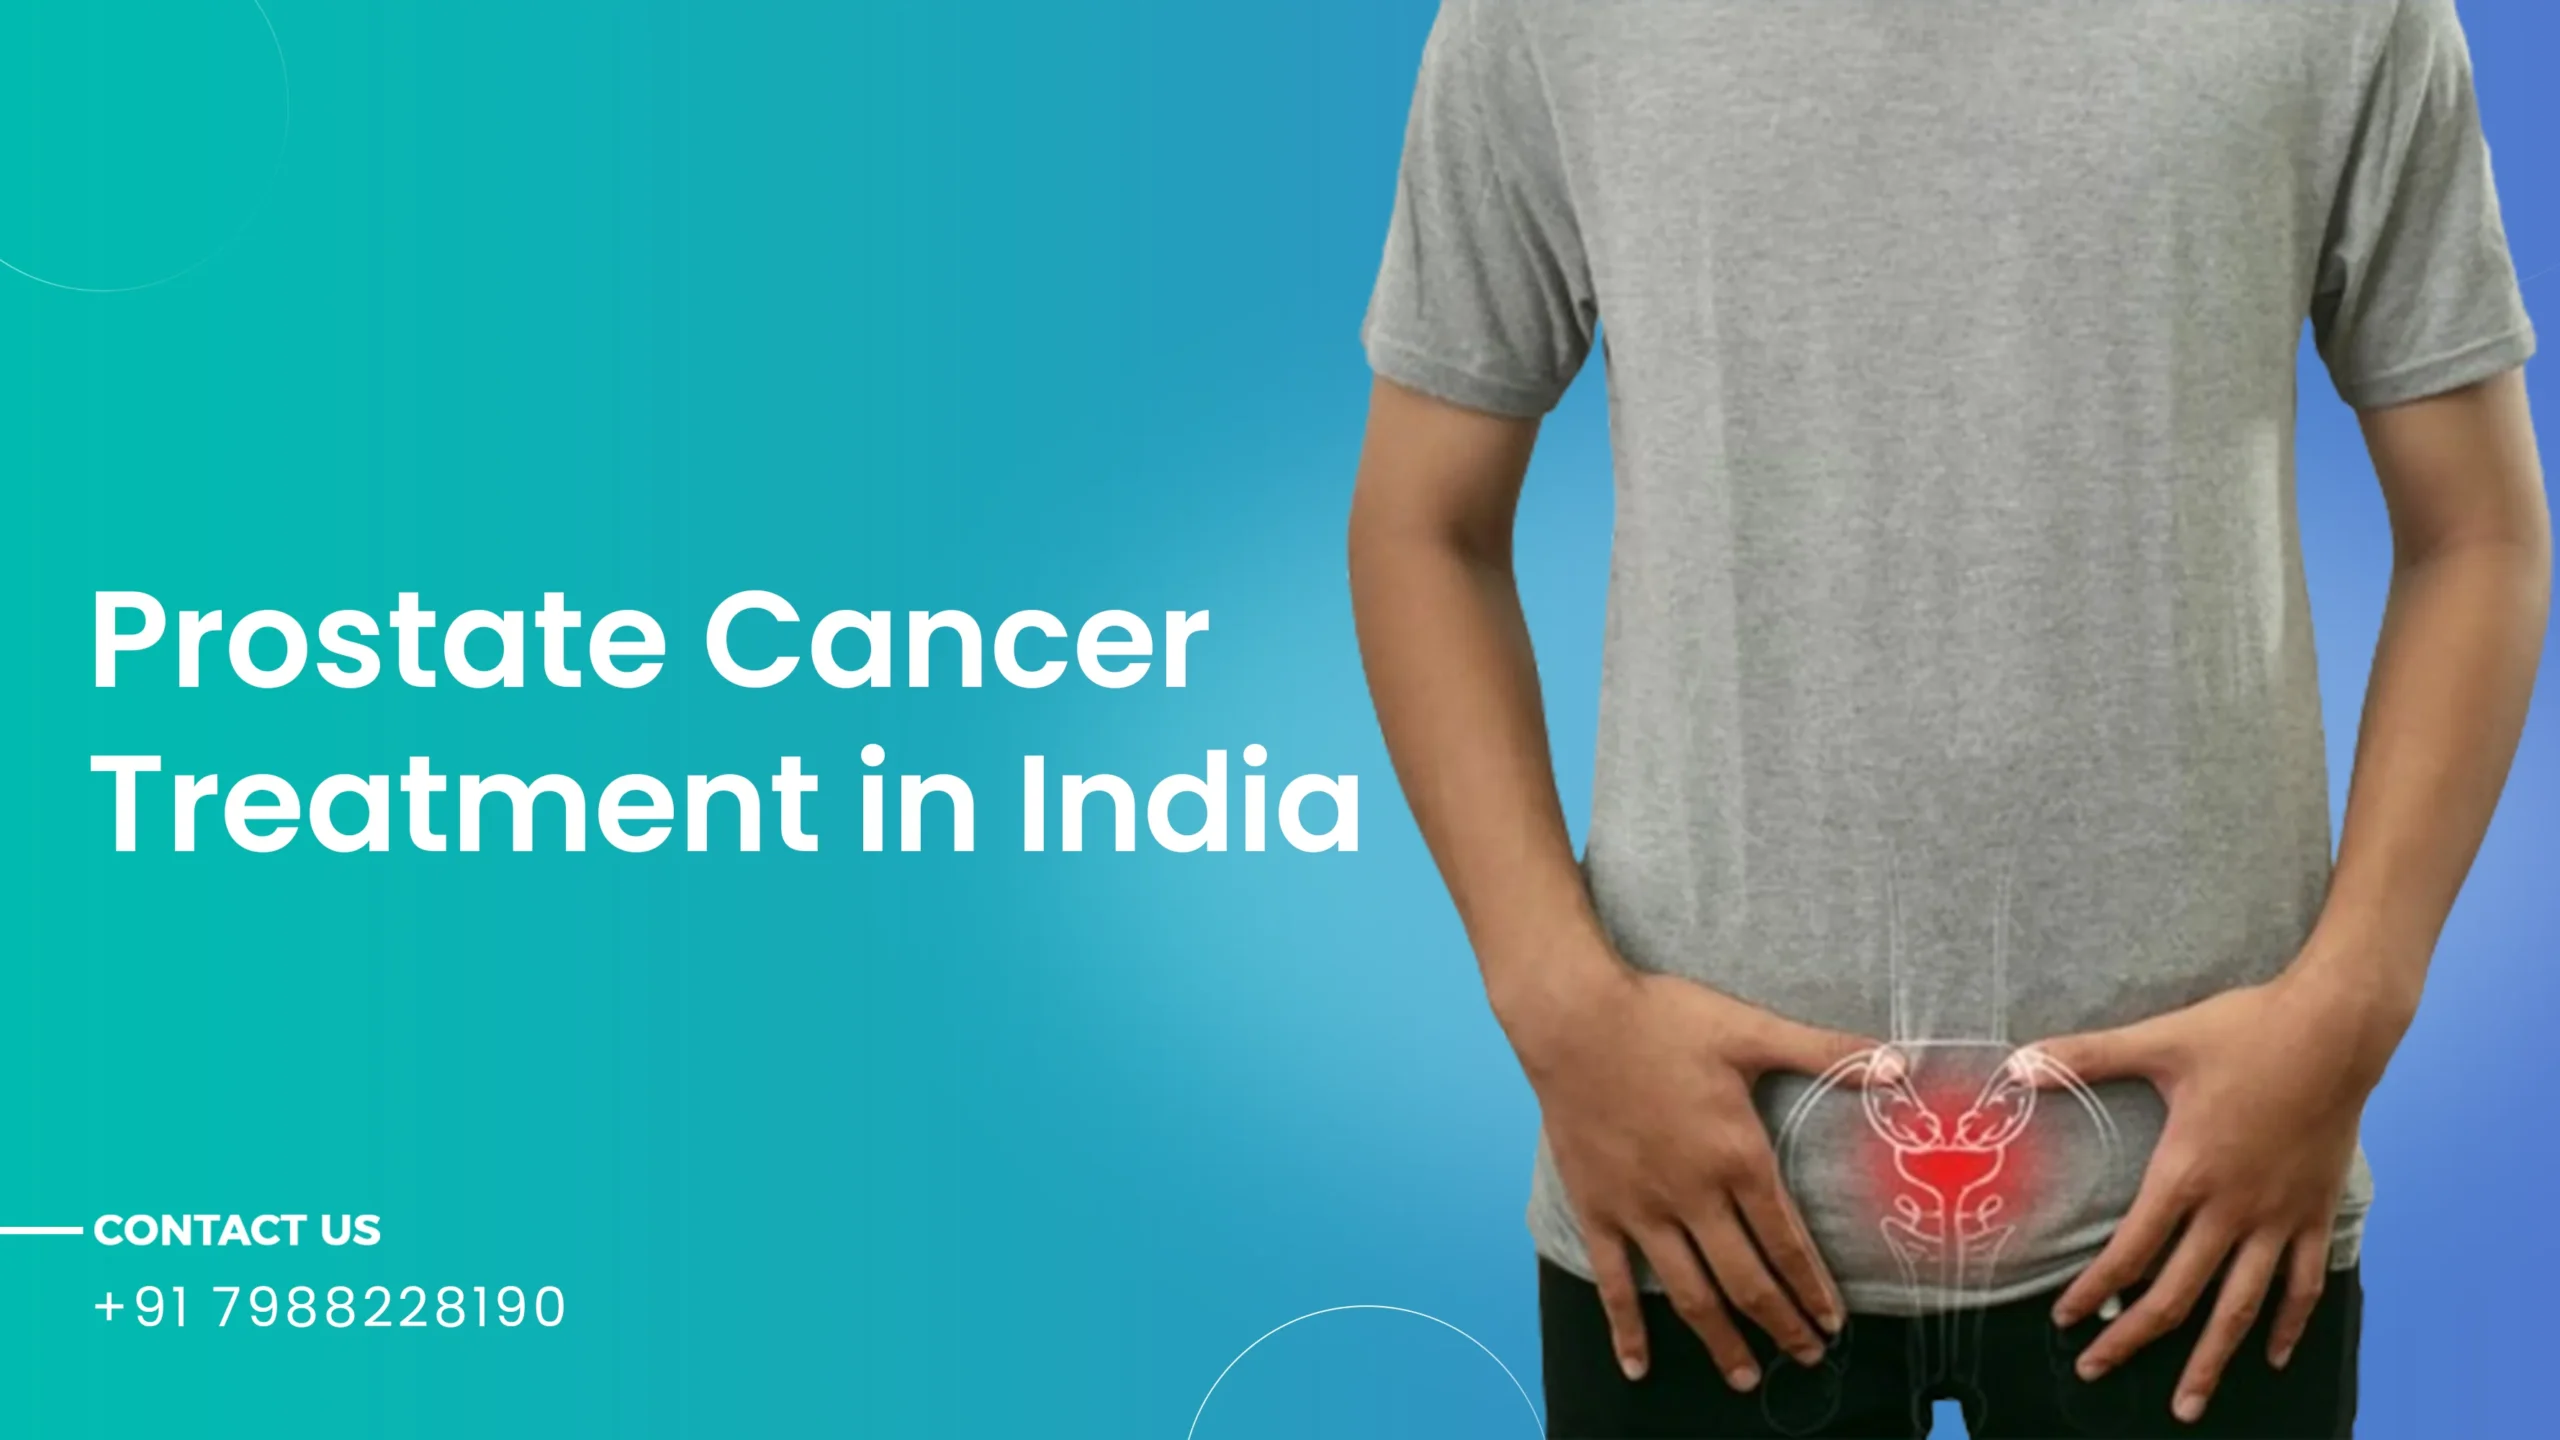 Prostate Cancer treatment cost in india